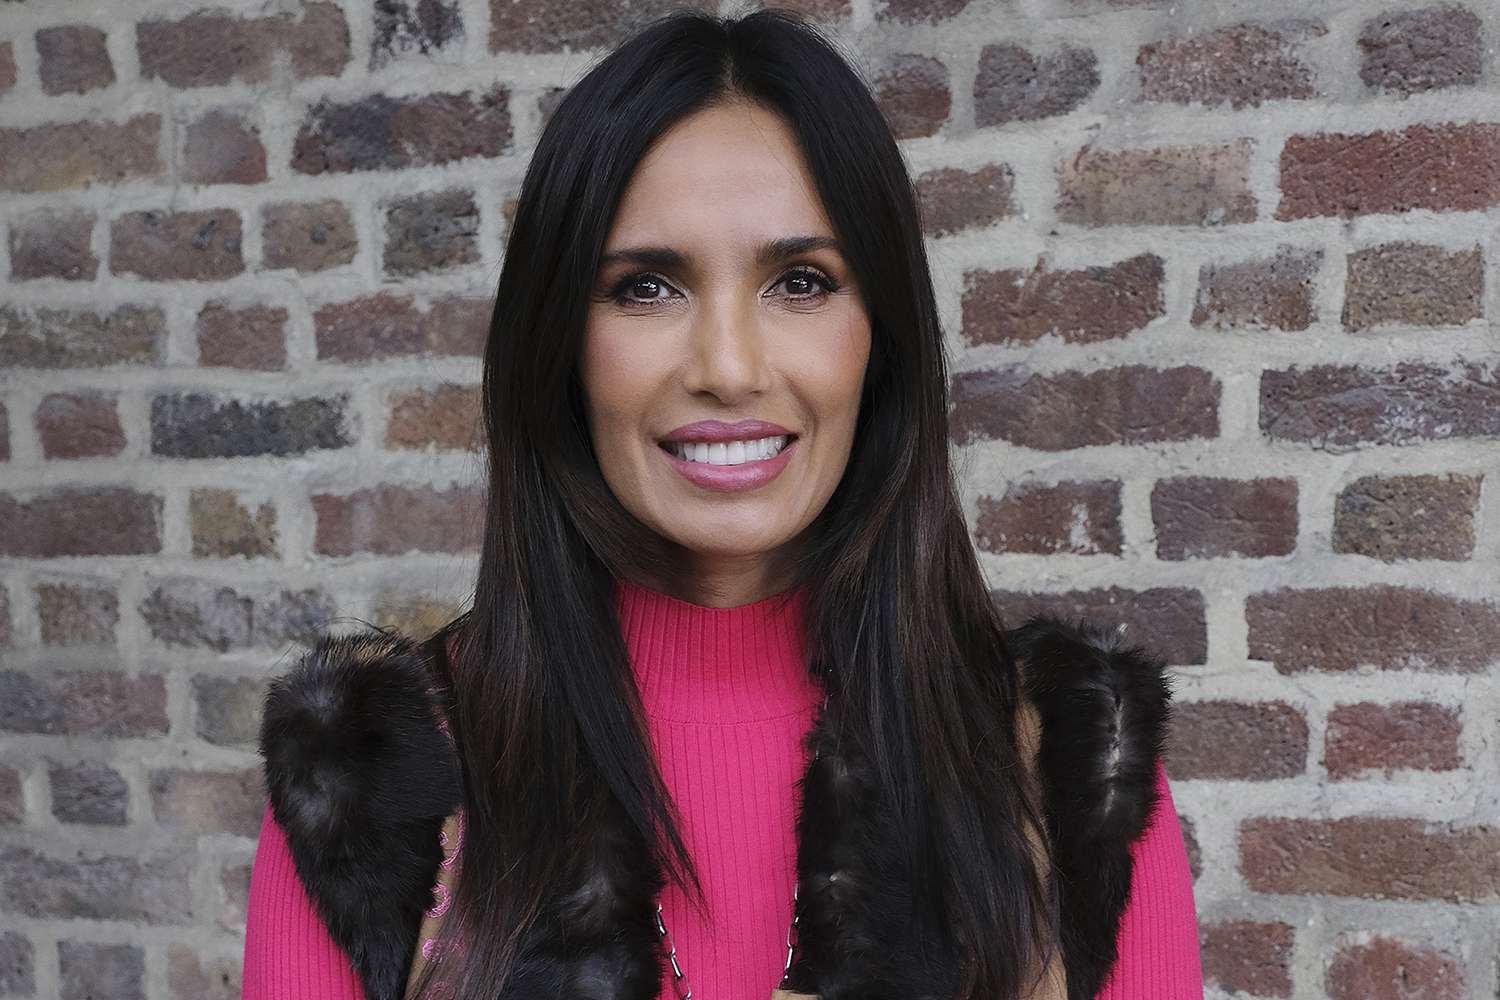 Padma Lakshmi Shares Her Approach to Health: ‘I Try to Be Kind to My Body’ [Video]